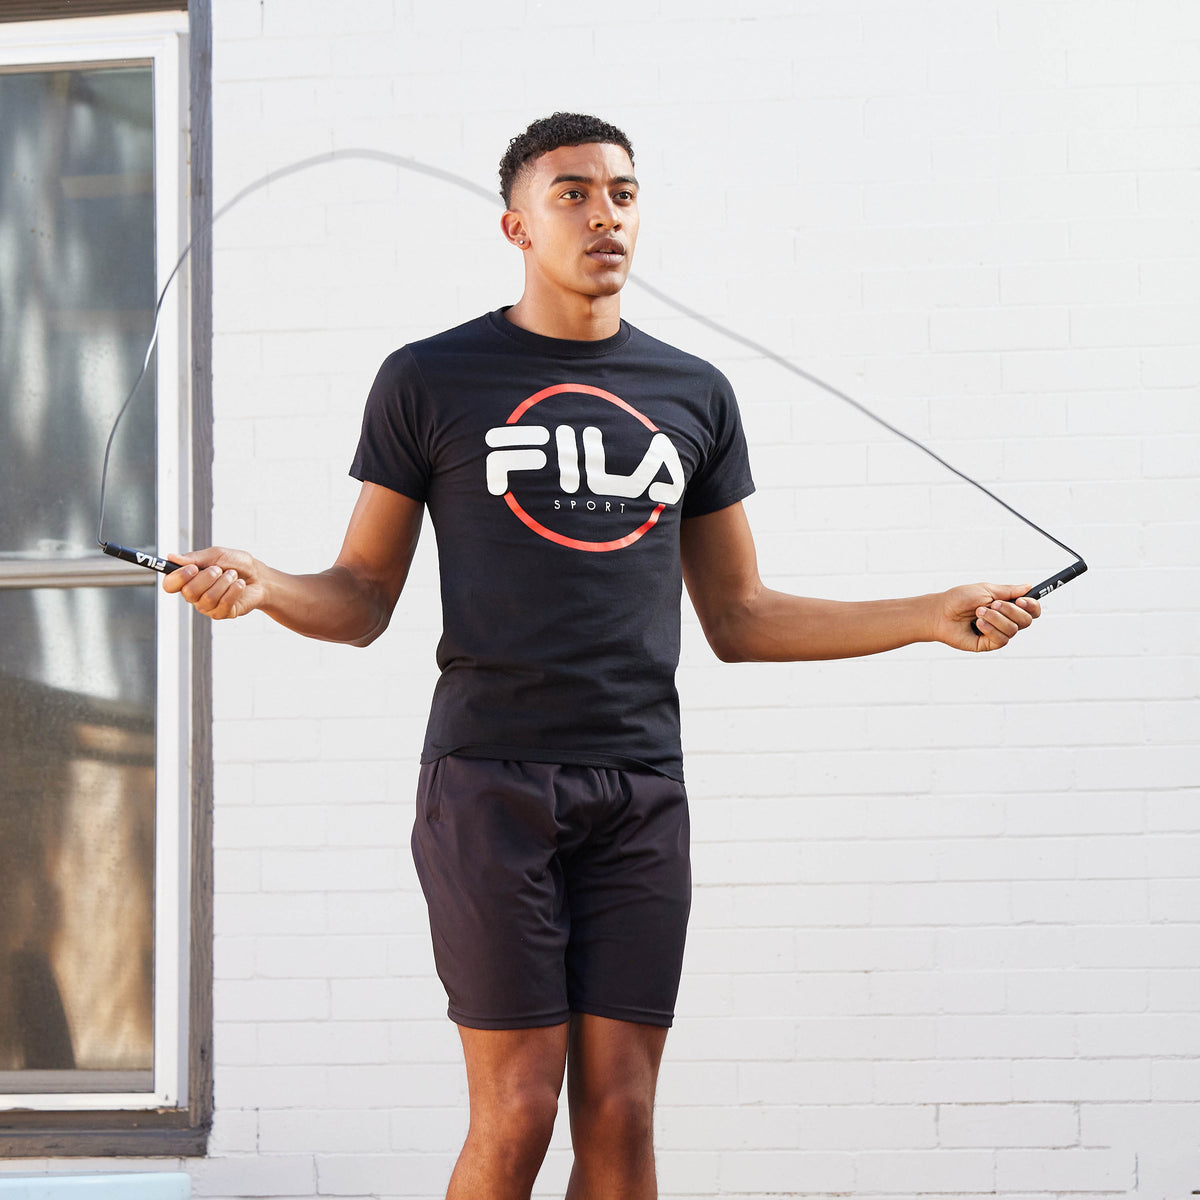 Person jumping rope with the Classic Speed Rope